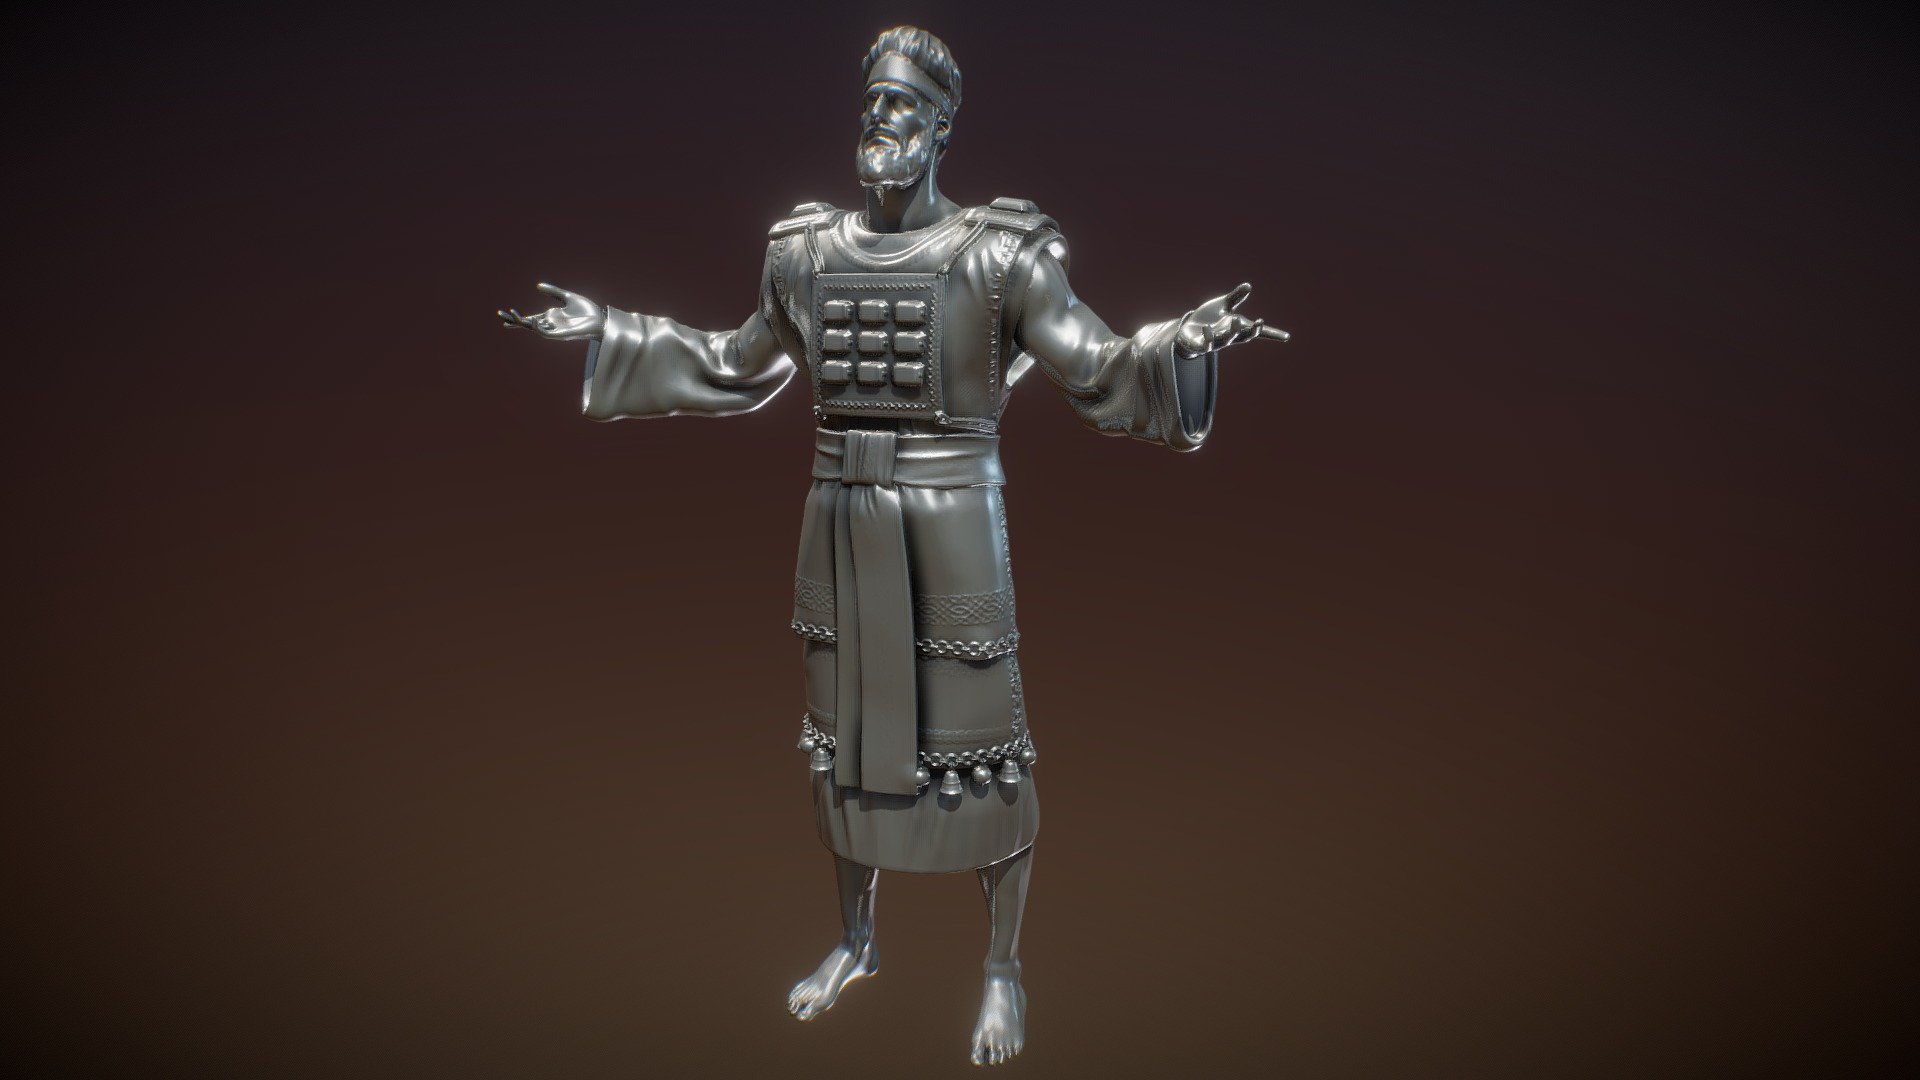 My first model sculpted in Zbrush
This character is a Israelite High Priest.
The Bible tells us that the Levites were consecrated by God, through Moses, for the service of the Tabernacle.
Aaron, the first High Priest of Israel. Aaron wears the vestments indicated by Exodus 28: the breastplate with the twelve stones, secured by gold chains and carried over the ephod, and the miter with the gold plate that bears the inscription &ldquo;Holiness to the Lord